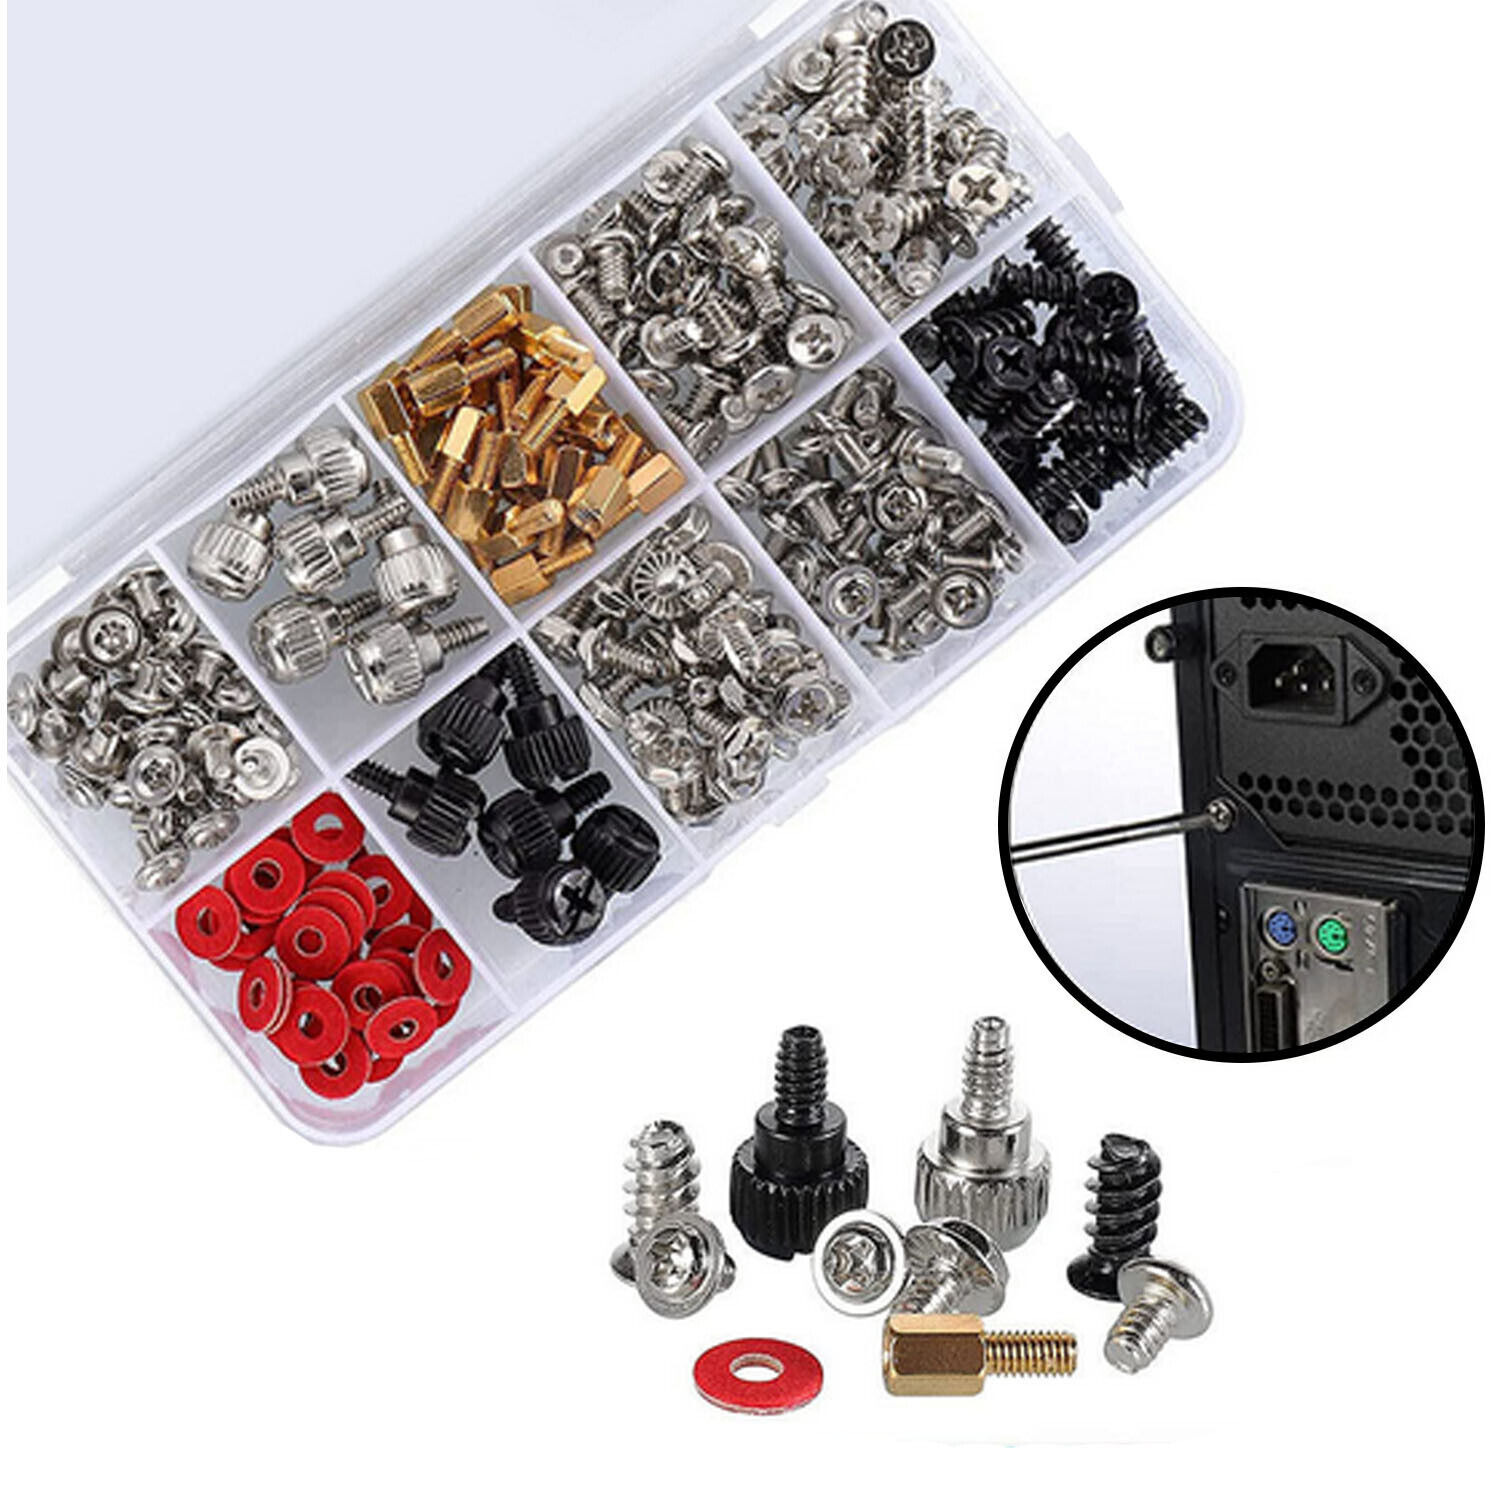 228 Pieces Screws Standoffs Kit For PC Computer Hard Drive Motherboard Case Fan